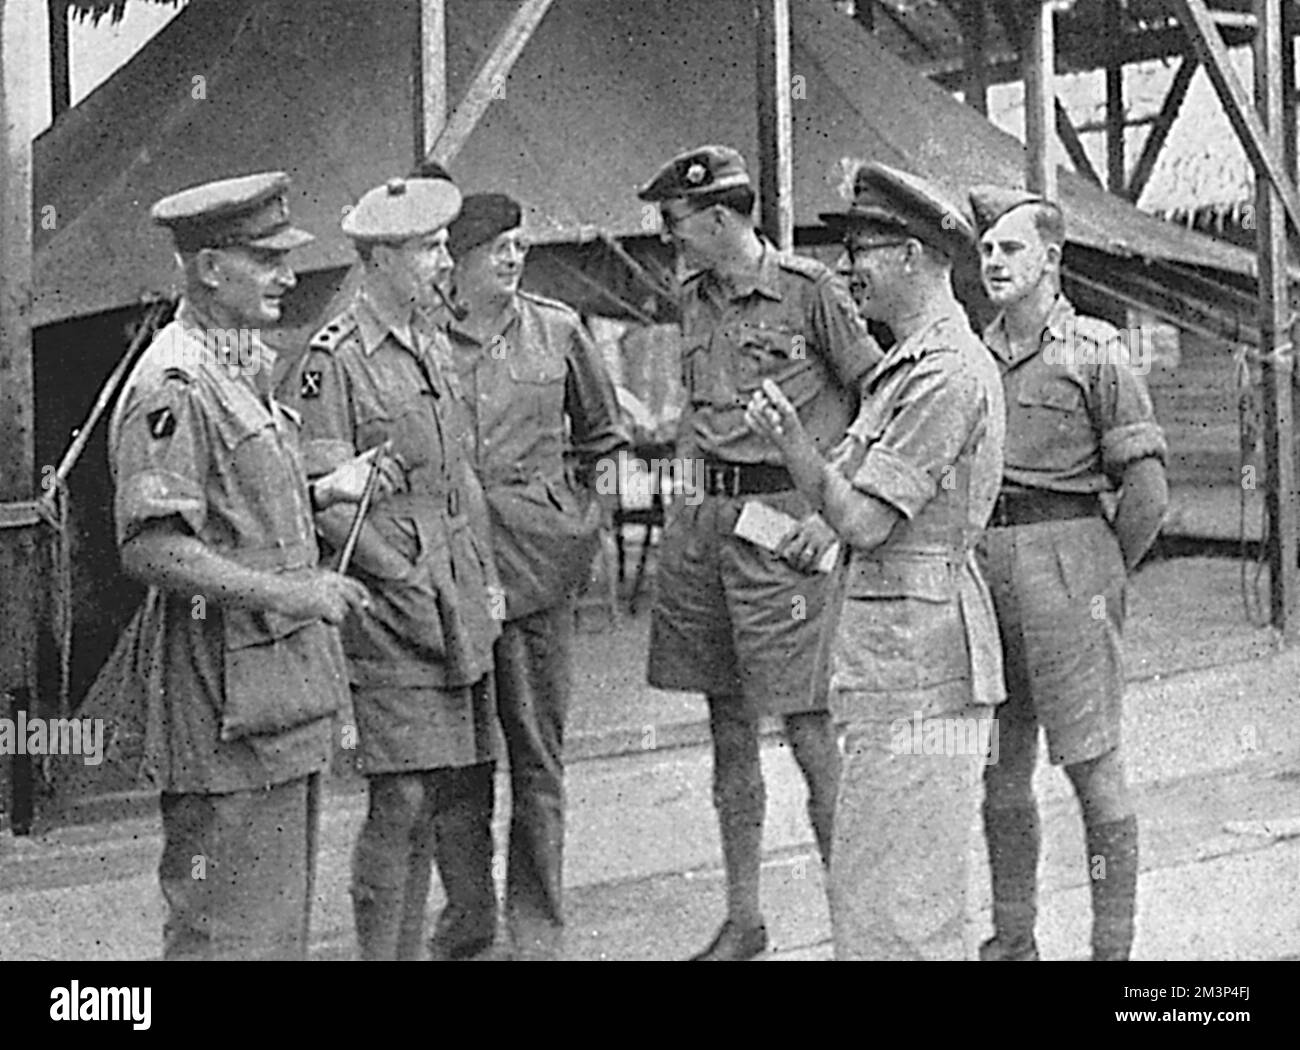 Presiding officer of the court martial, Brigadier M.V.Wright (left), commander of the 14th Indian Infantry Brigade, with members of the court awaiting the start of the day's proceedings. The Judge-Advocate, Major J.D.M.Smith, is wearing a black beret.  In May 1946, at the Muar Camp in Malaya, over 250 privates refused to obey orders and were later charged with mutiny. Three were acquitted, eight sentenced to five years penal servitude and the rest two years imprisonment. When news reached the UK, two days after sentencing, the Judge Advocate-General quashed the sentences due to irregularities Stock Photo